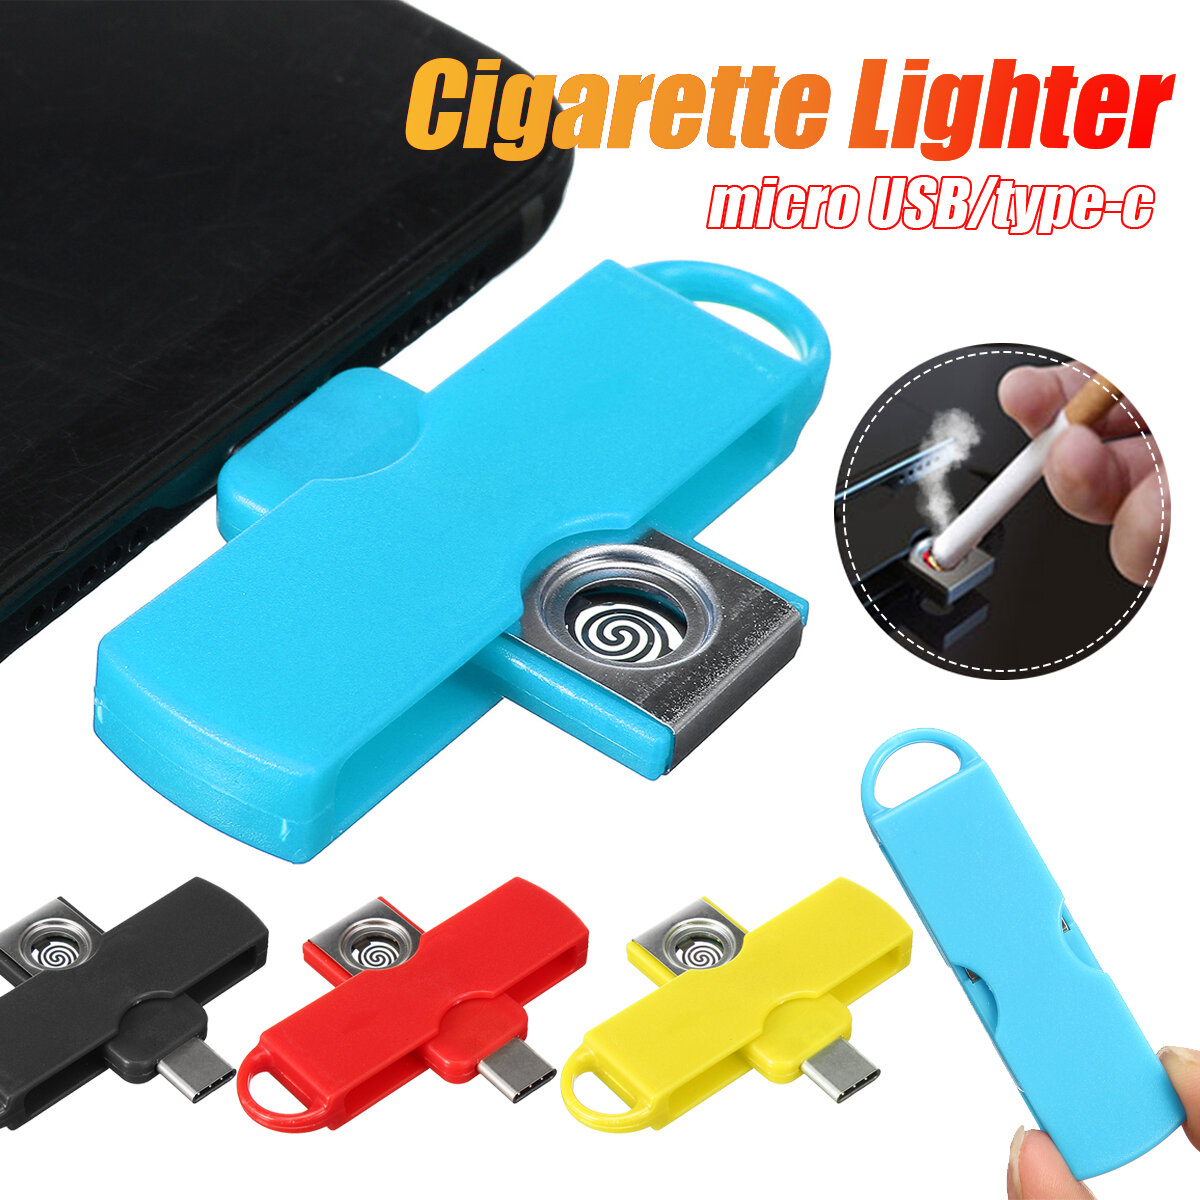 Bakeey Portable Mini C-Lighter Adapter Micro USB Type-c Connected to Mobile Phone For Huawei P30 P40 Pro MI10 Note 9S